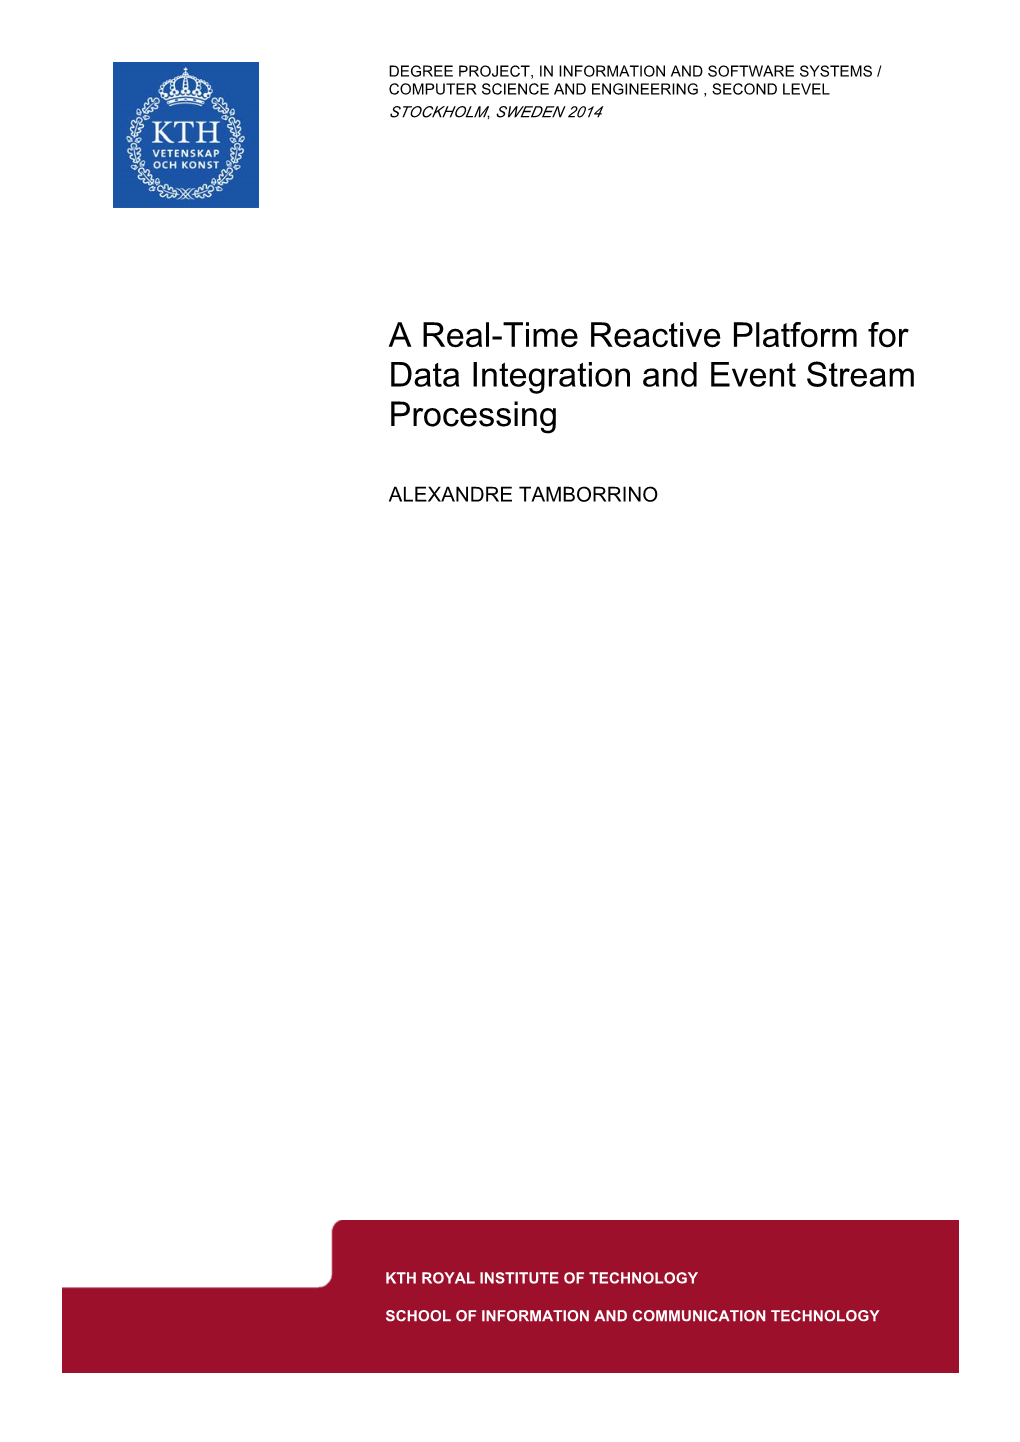 A Real-Time Reactive Platform for Data Integration and Event Stream Processing